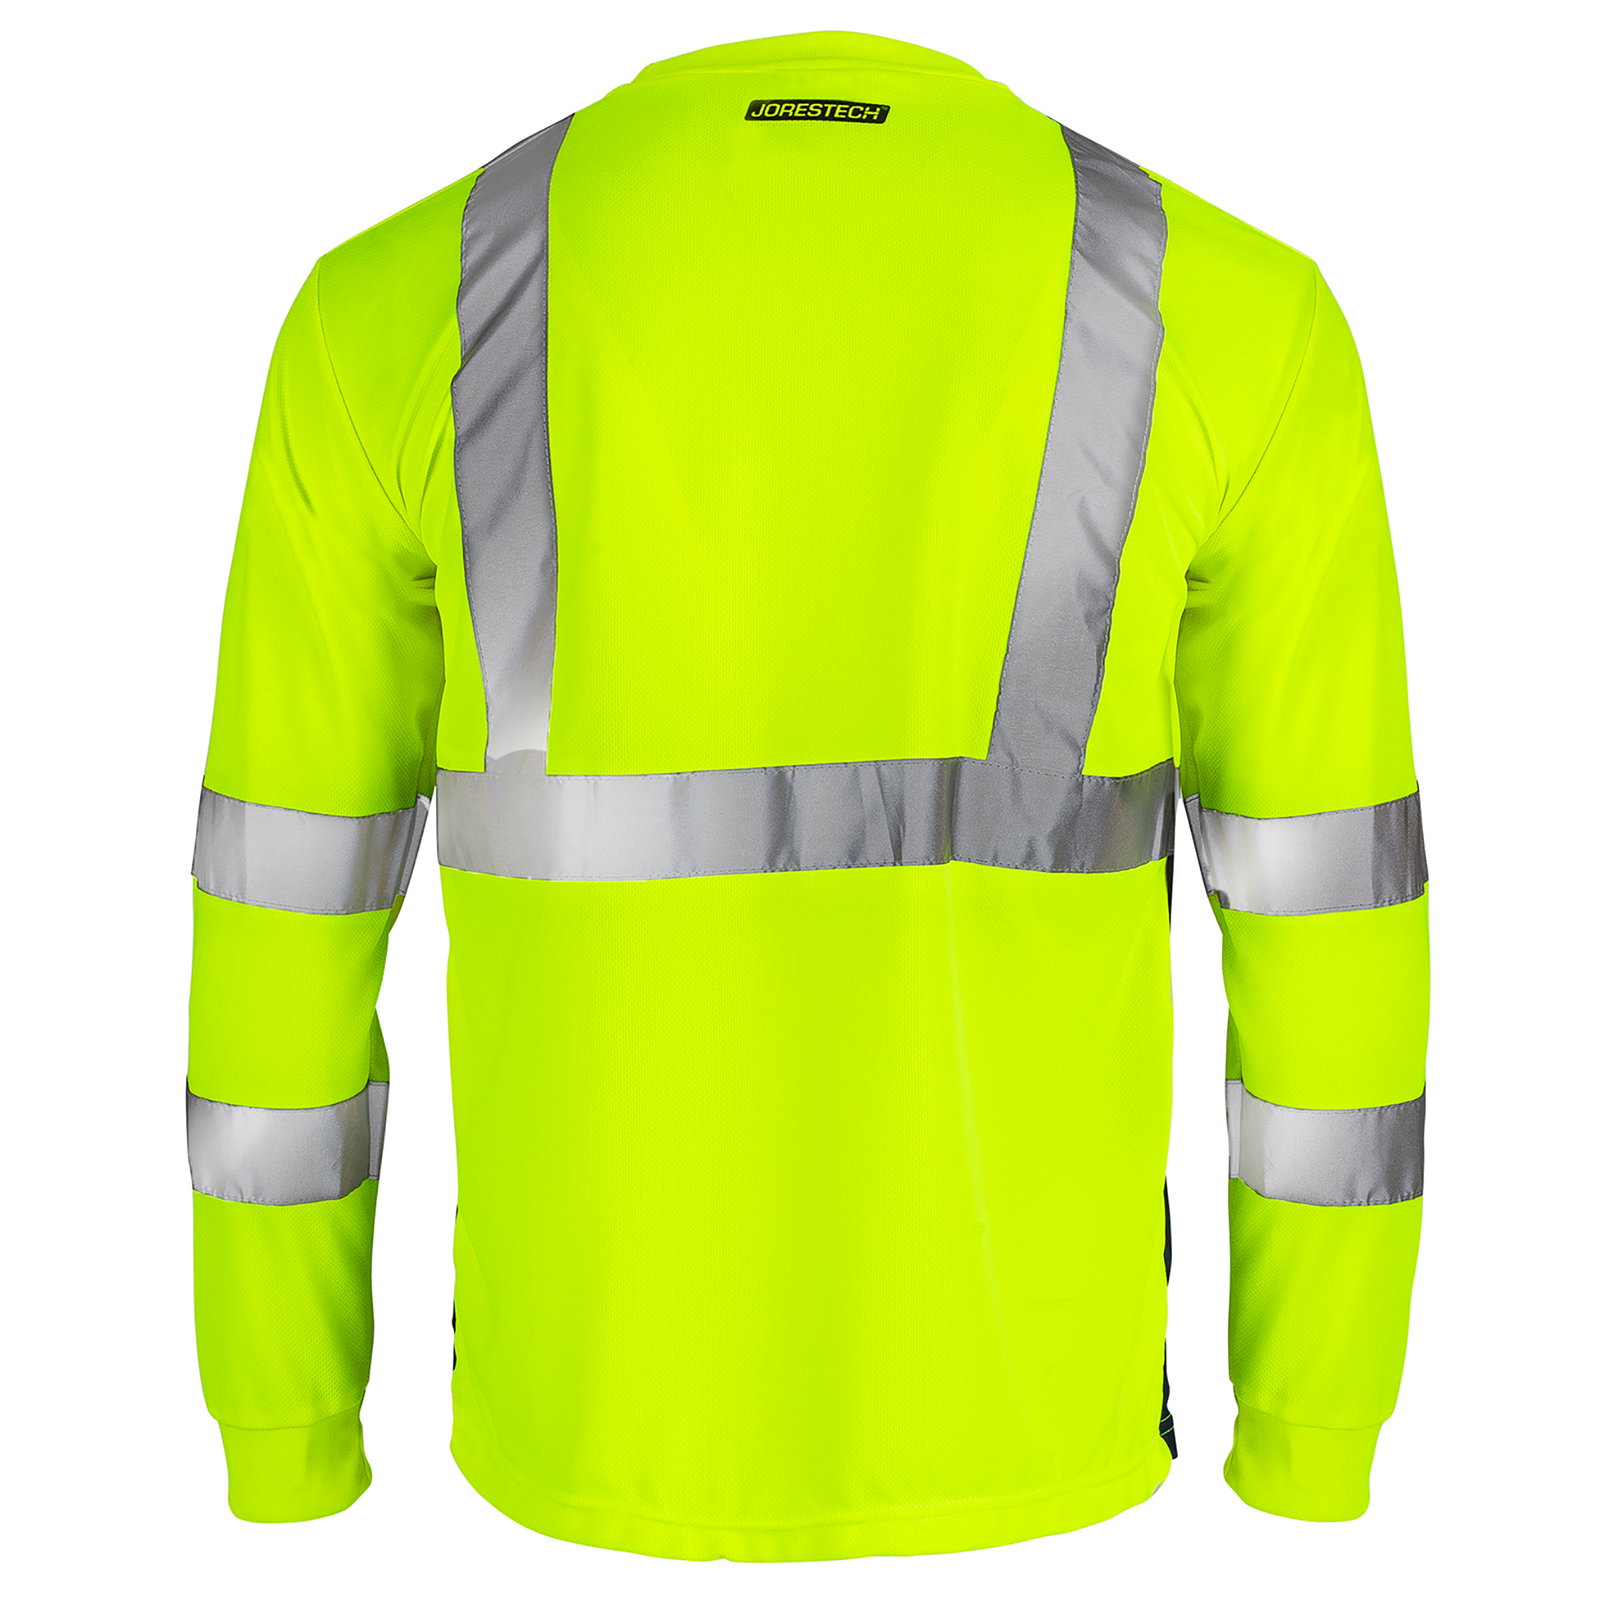 Back view of the yellow black JORESTECH  hi-vis reflective safety long sleeve shirt ANSI class 3 type R